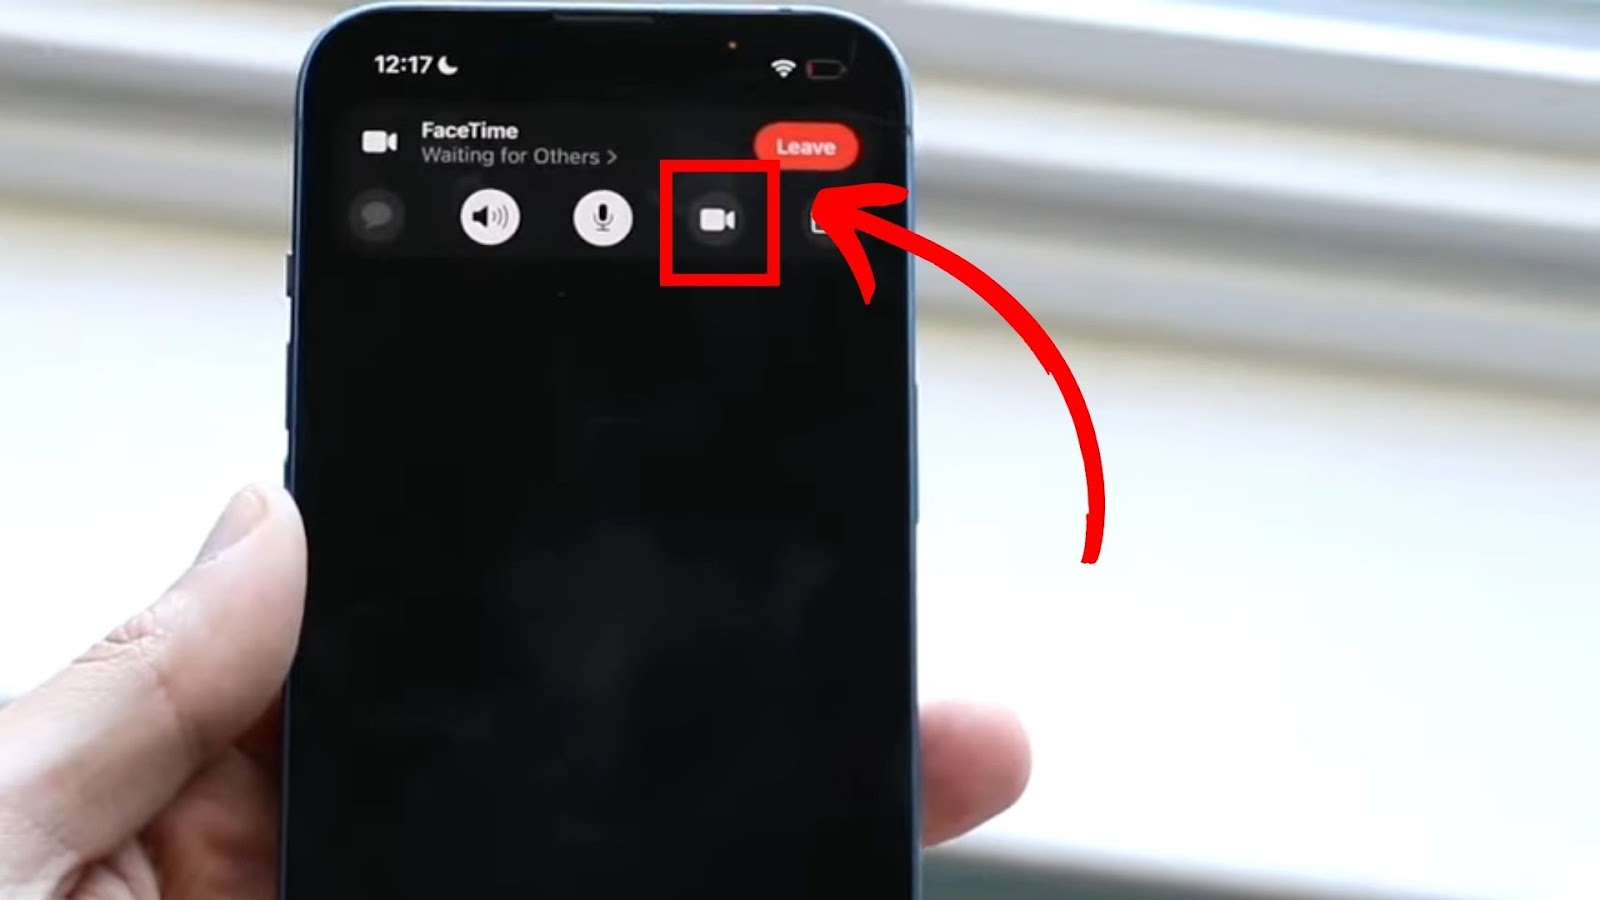 How To Turn Off iPhone FaceTime Video Camera?